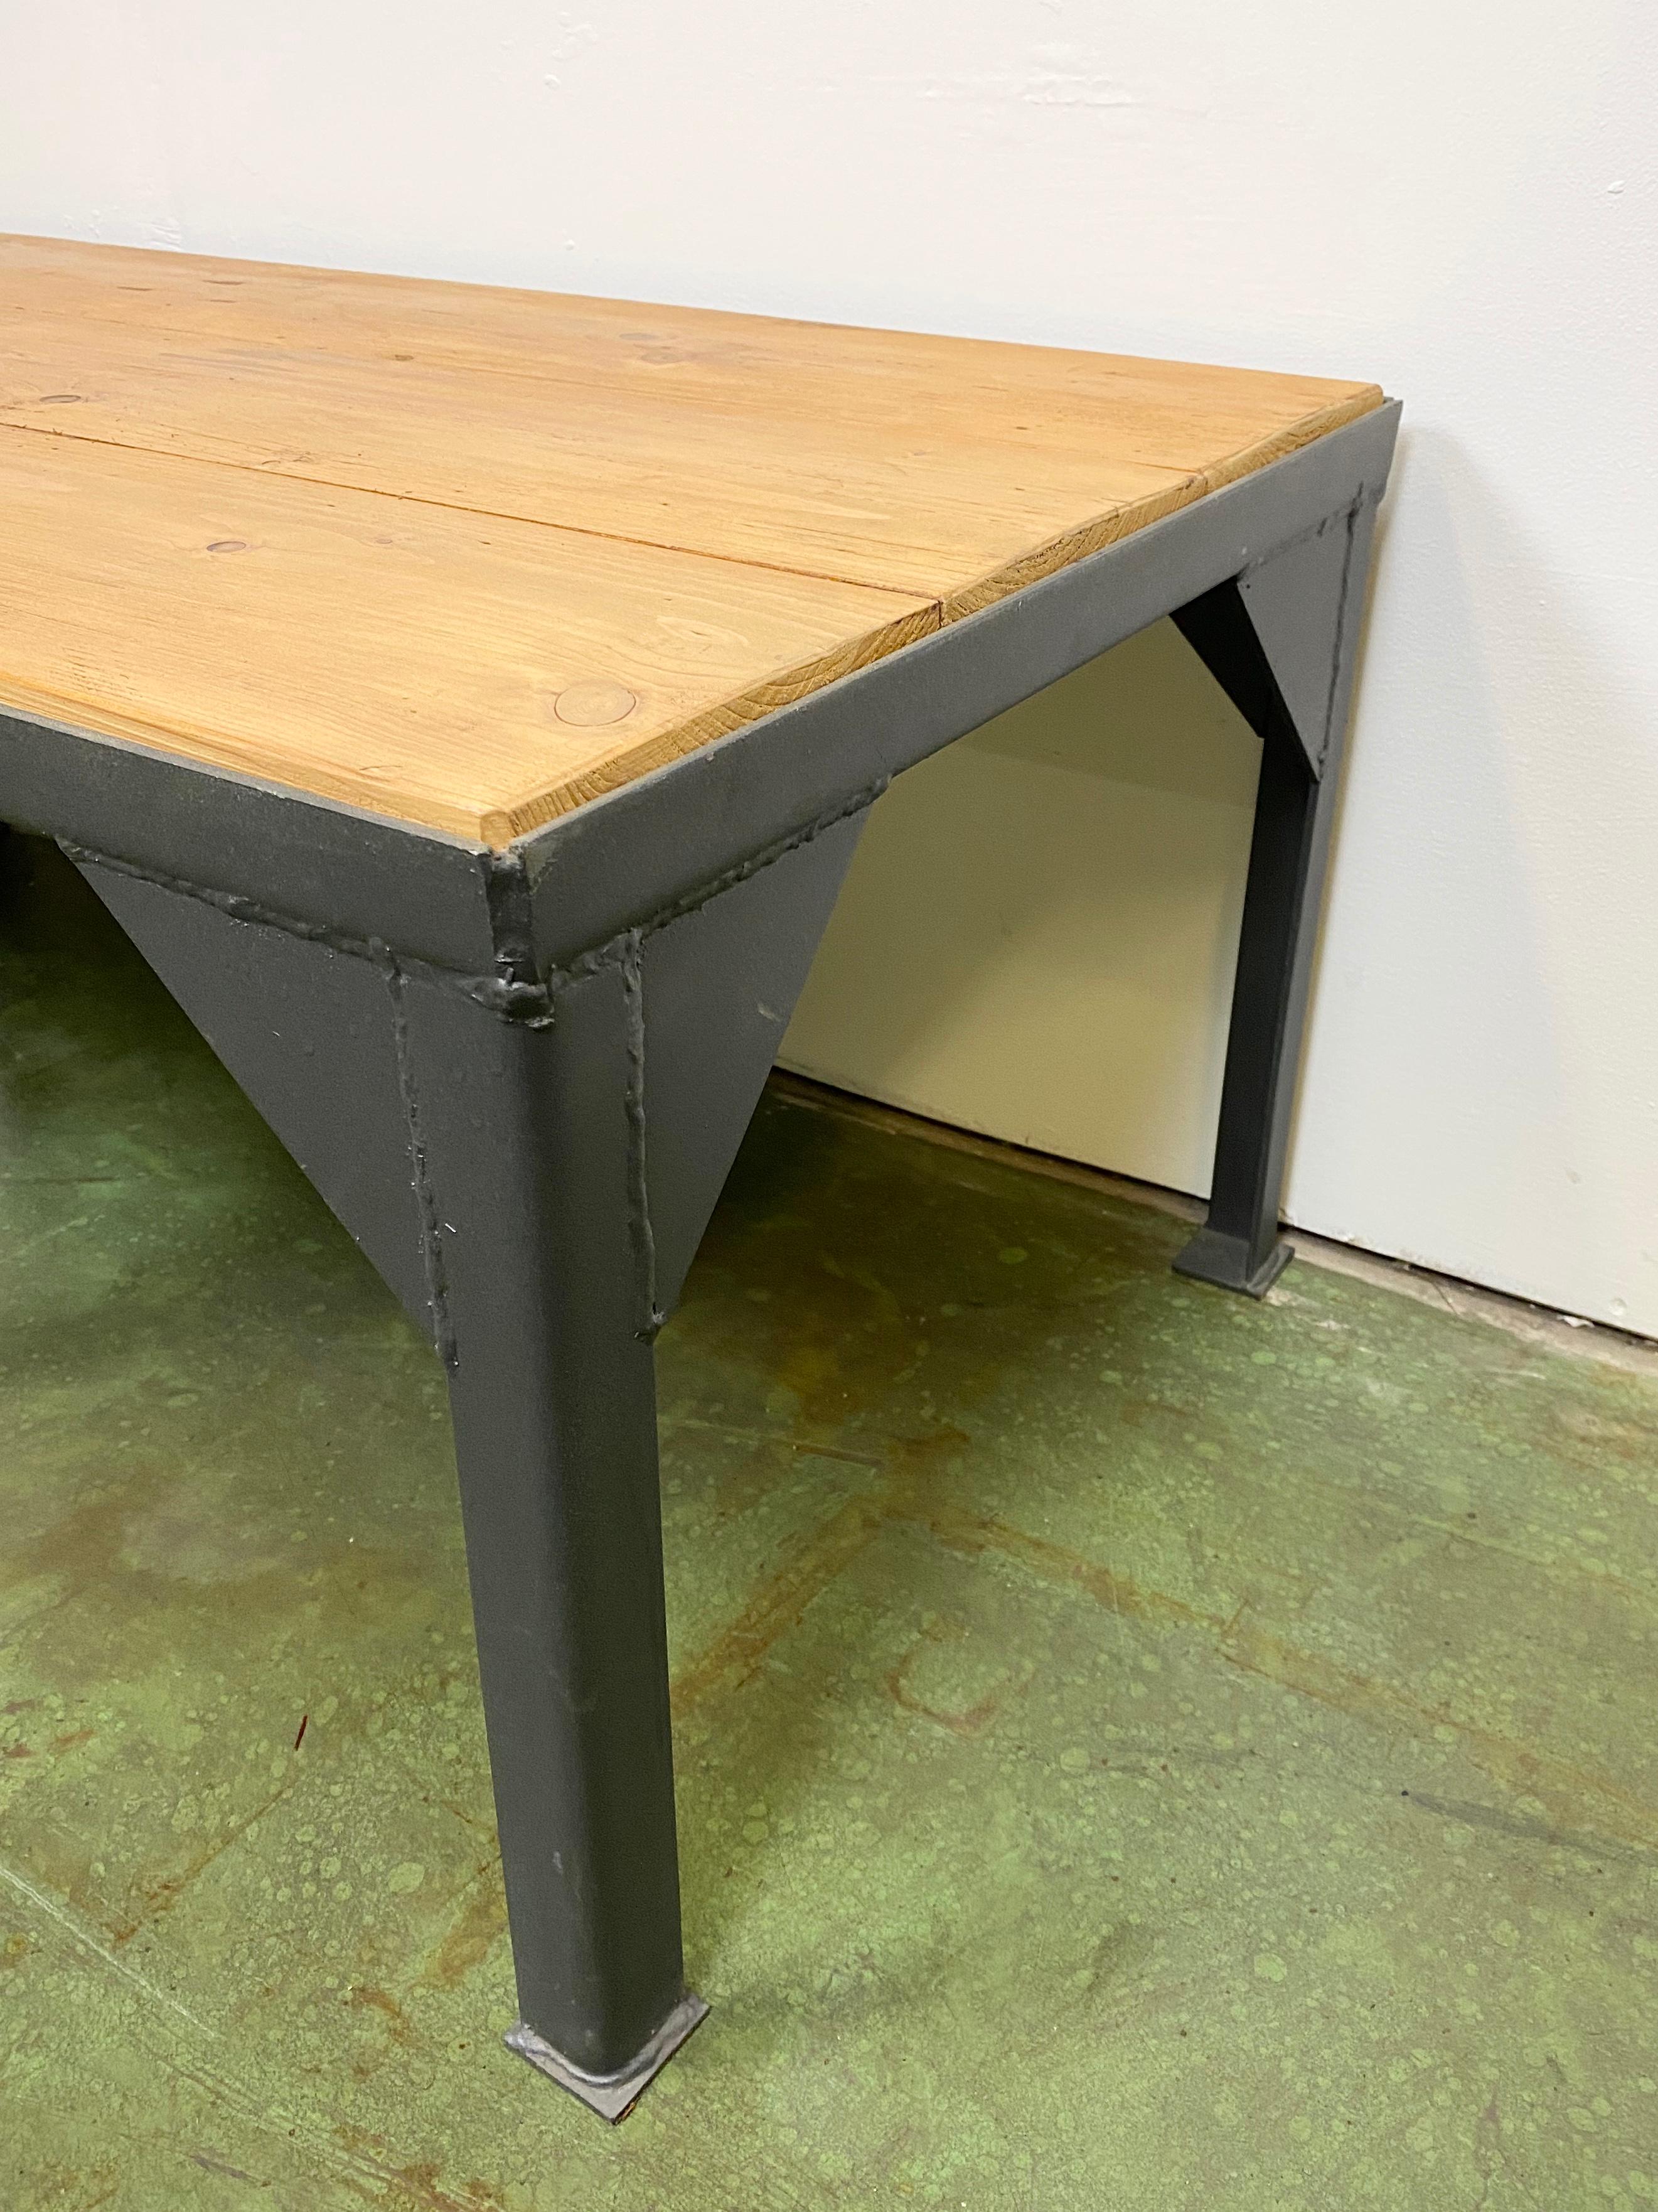 - Vintage industrial coffee table manufactured in the 1970s
- Made of solid wood and iron
- Weight of the table is 35 kg.